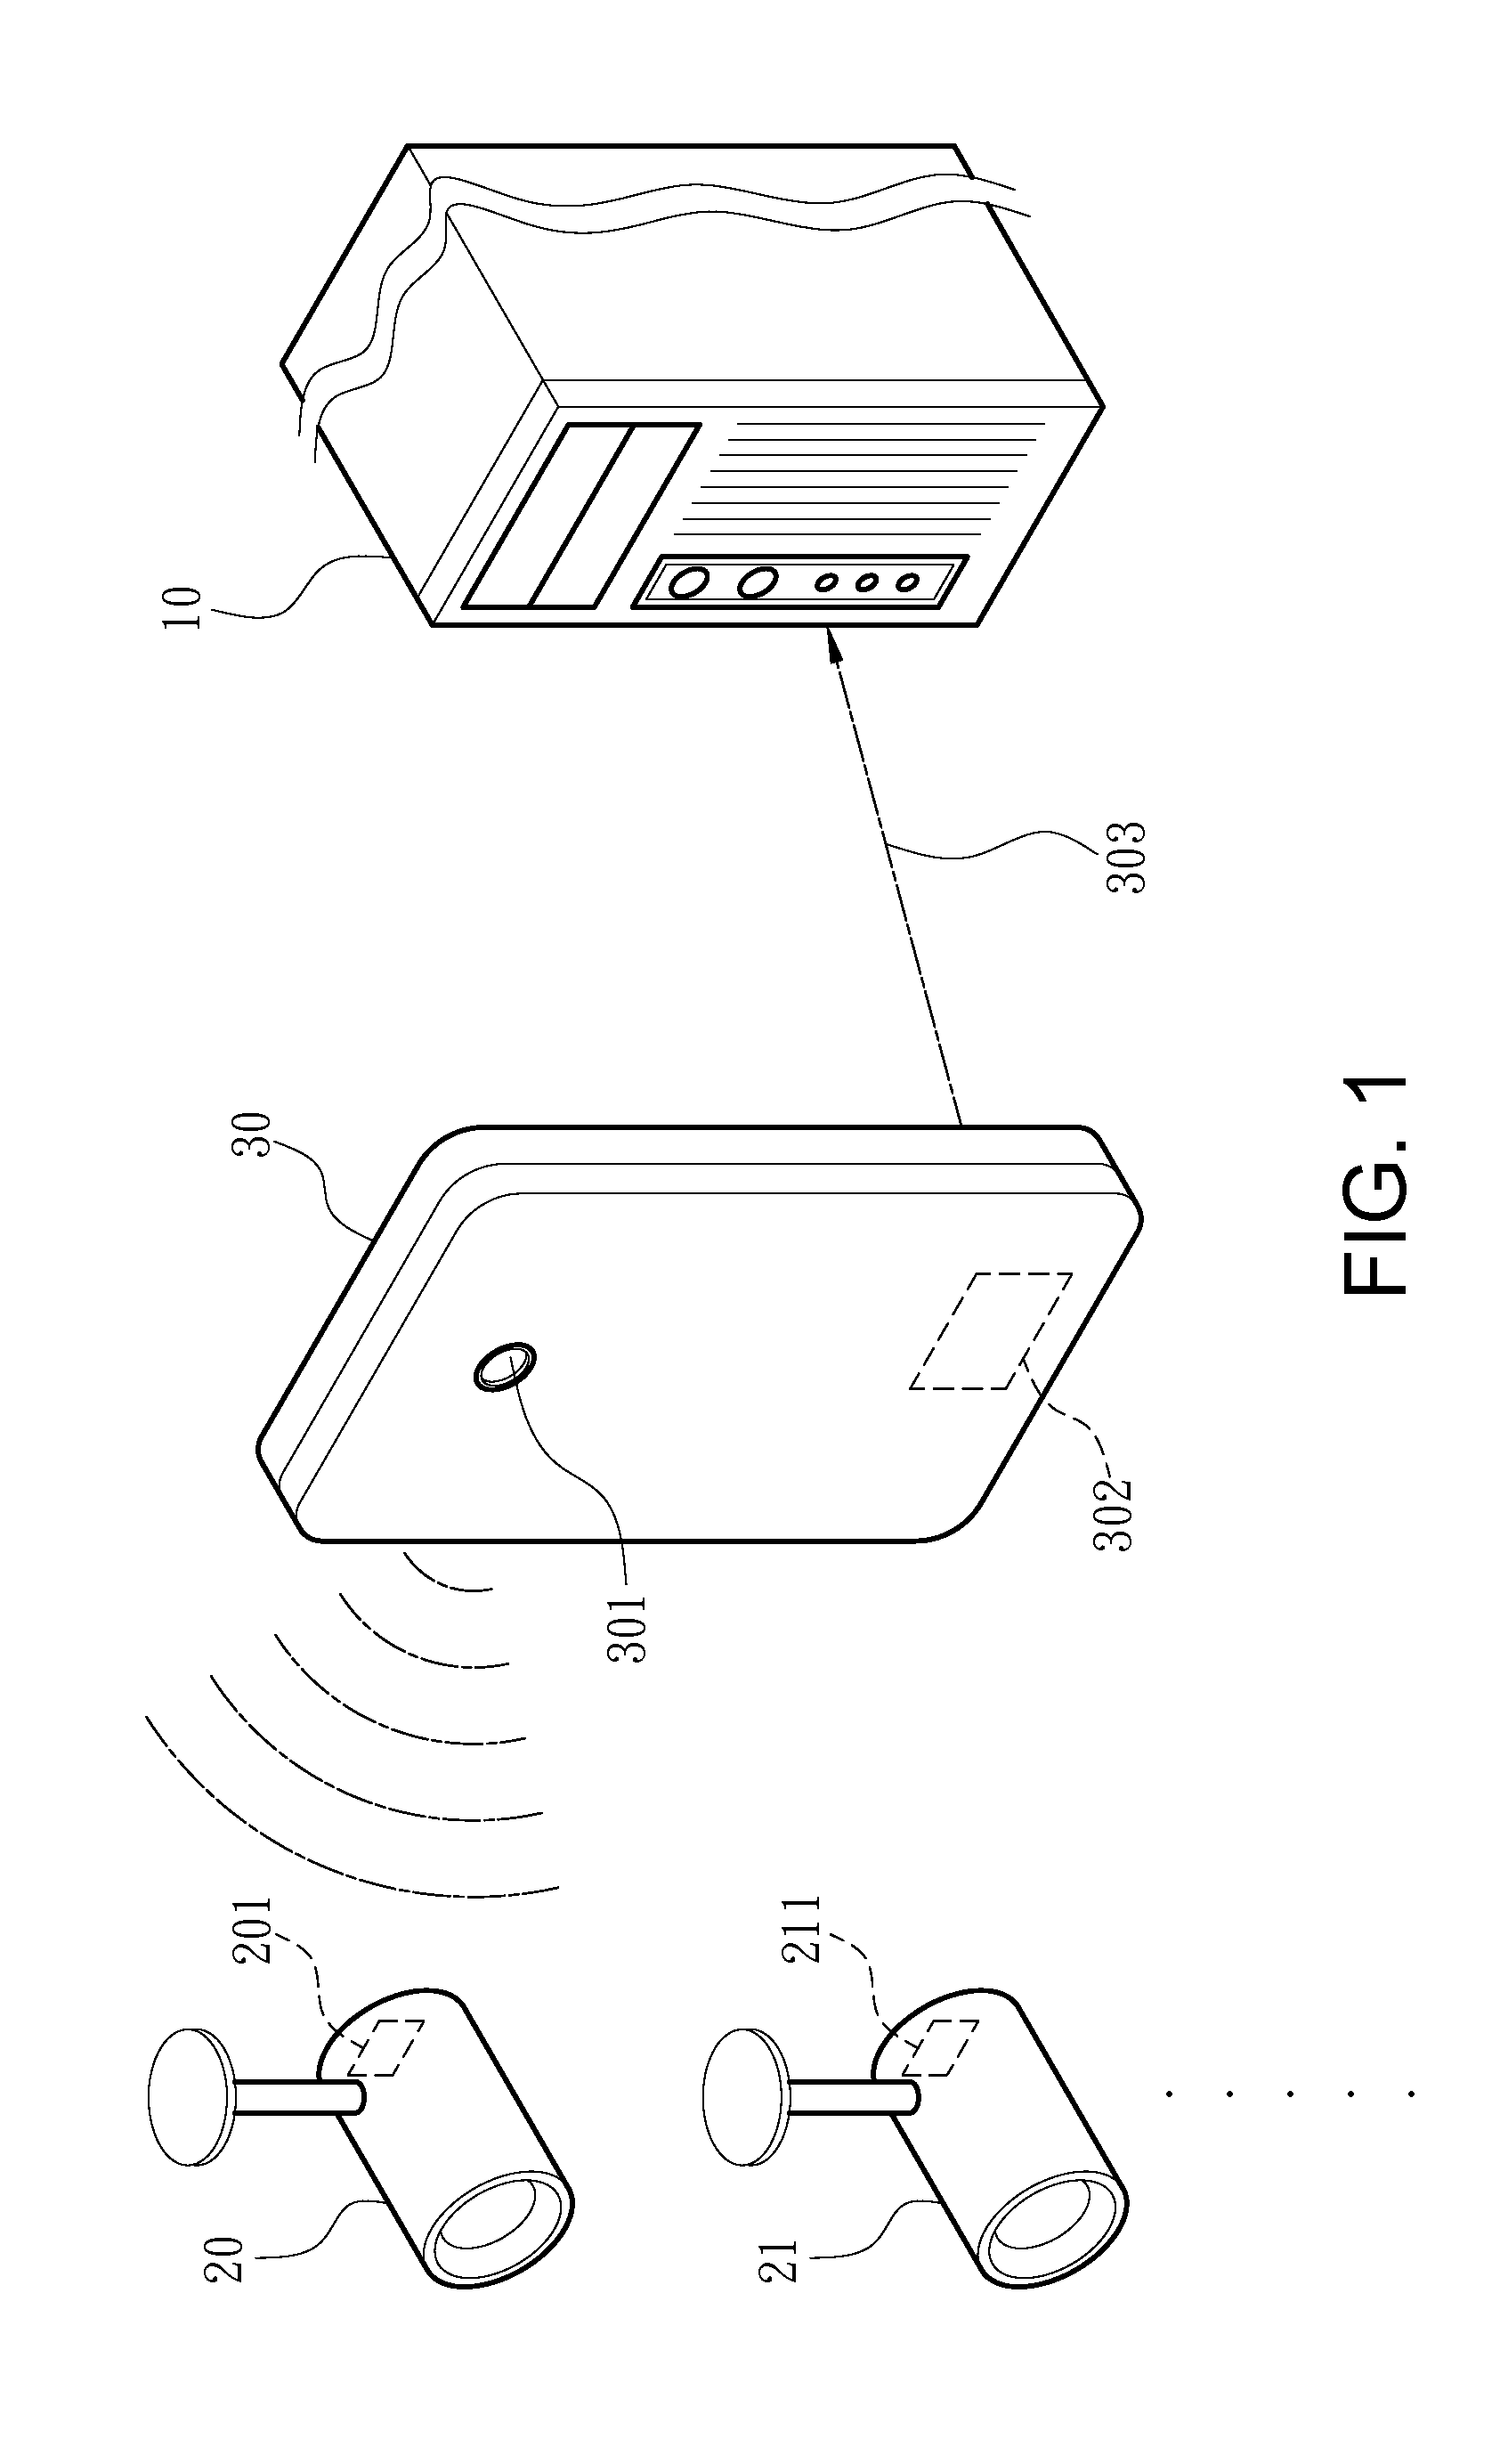 System and method of identifying networked device for establishing a p2p connection